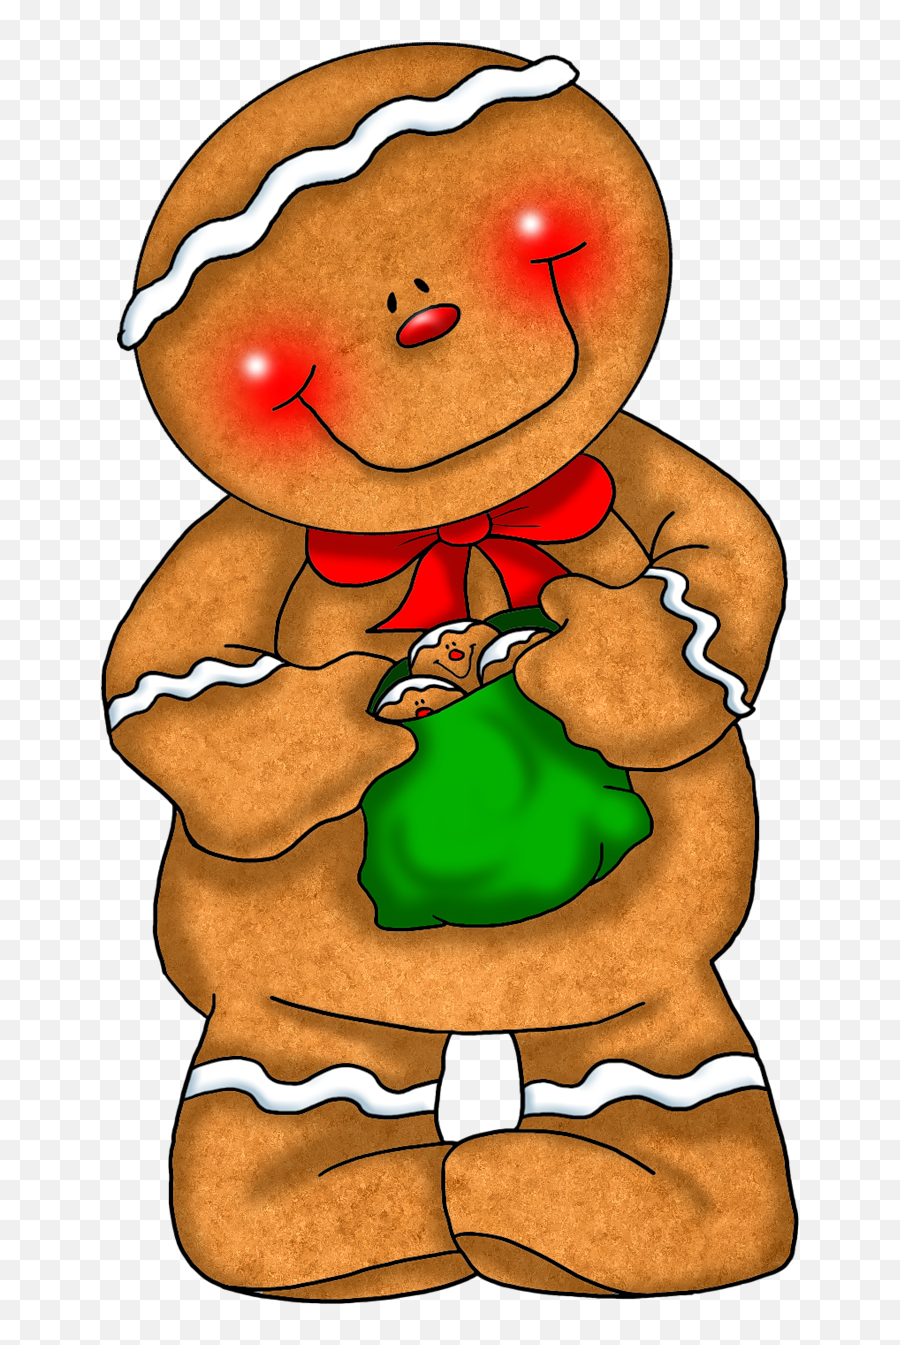 Clipart Of Gingerbread Man - Funny Ginger Bread Man Clipart Emoji,Gingerbread Cookie Emoji